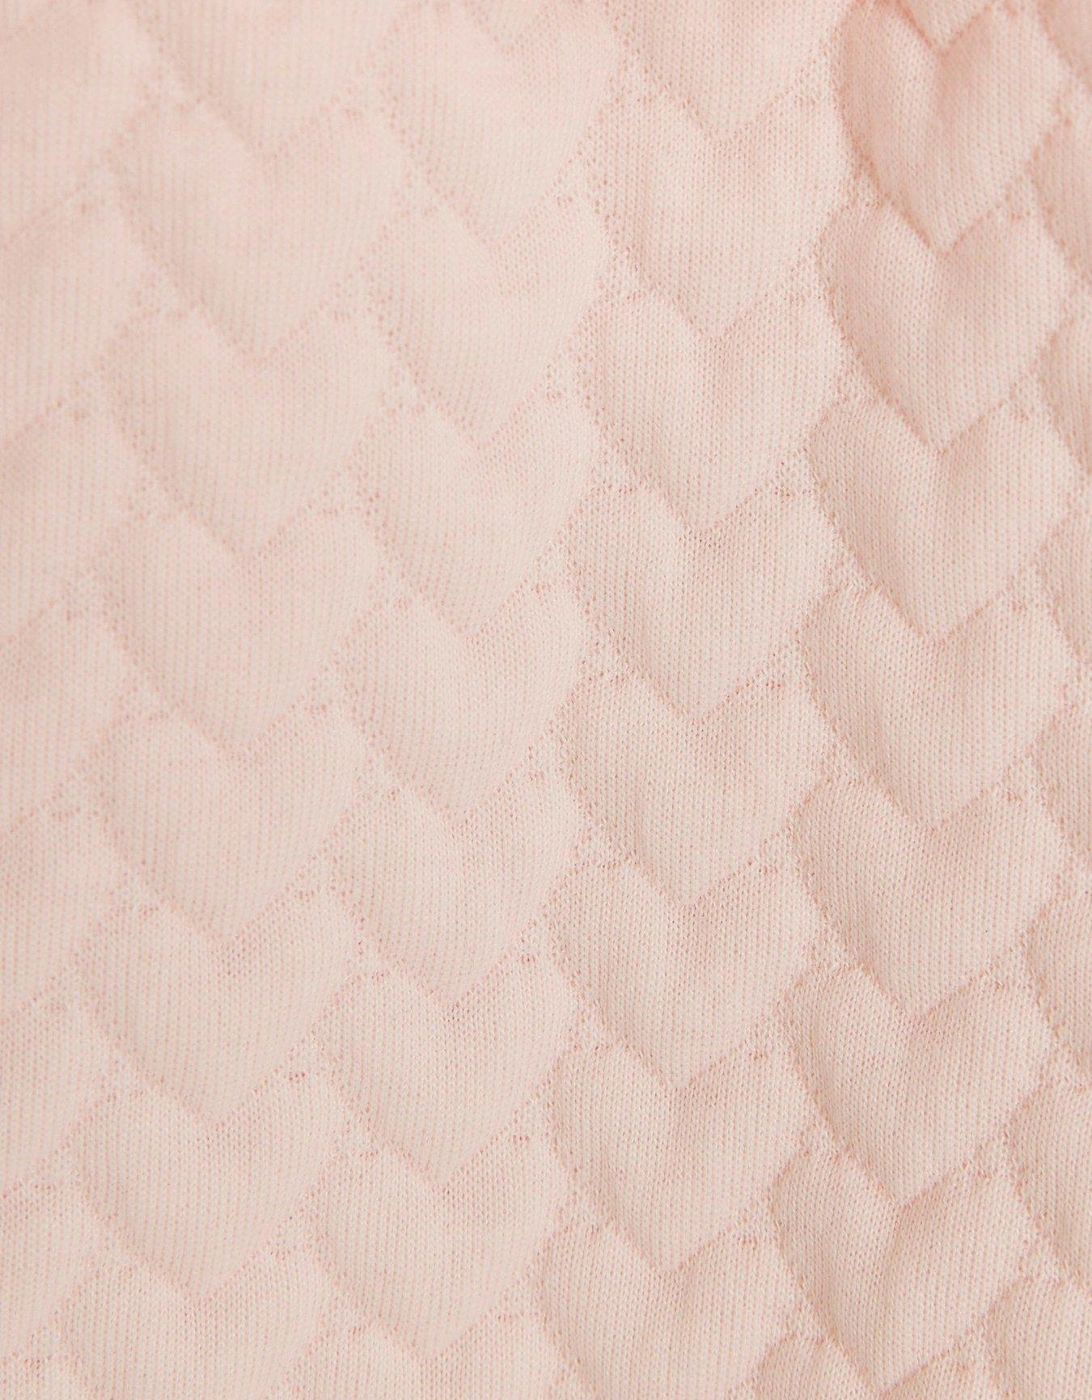 Baby Girls Heart Quilted 3 Piece Set - Pink